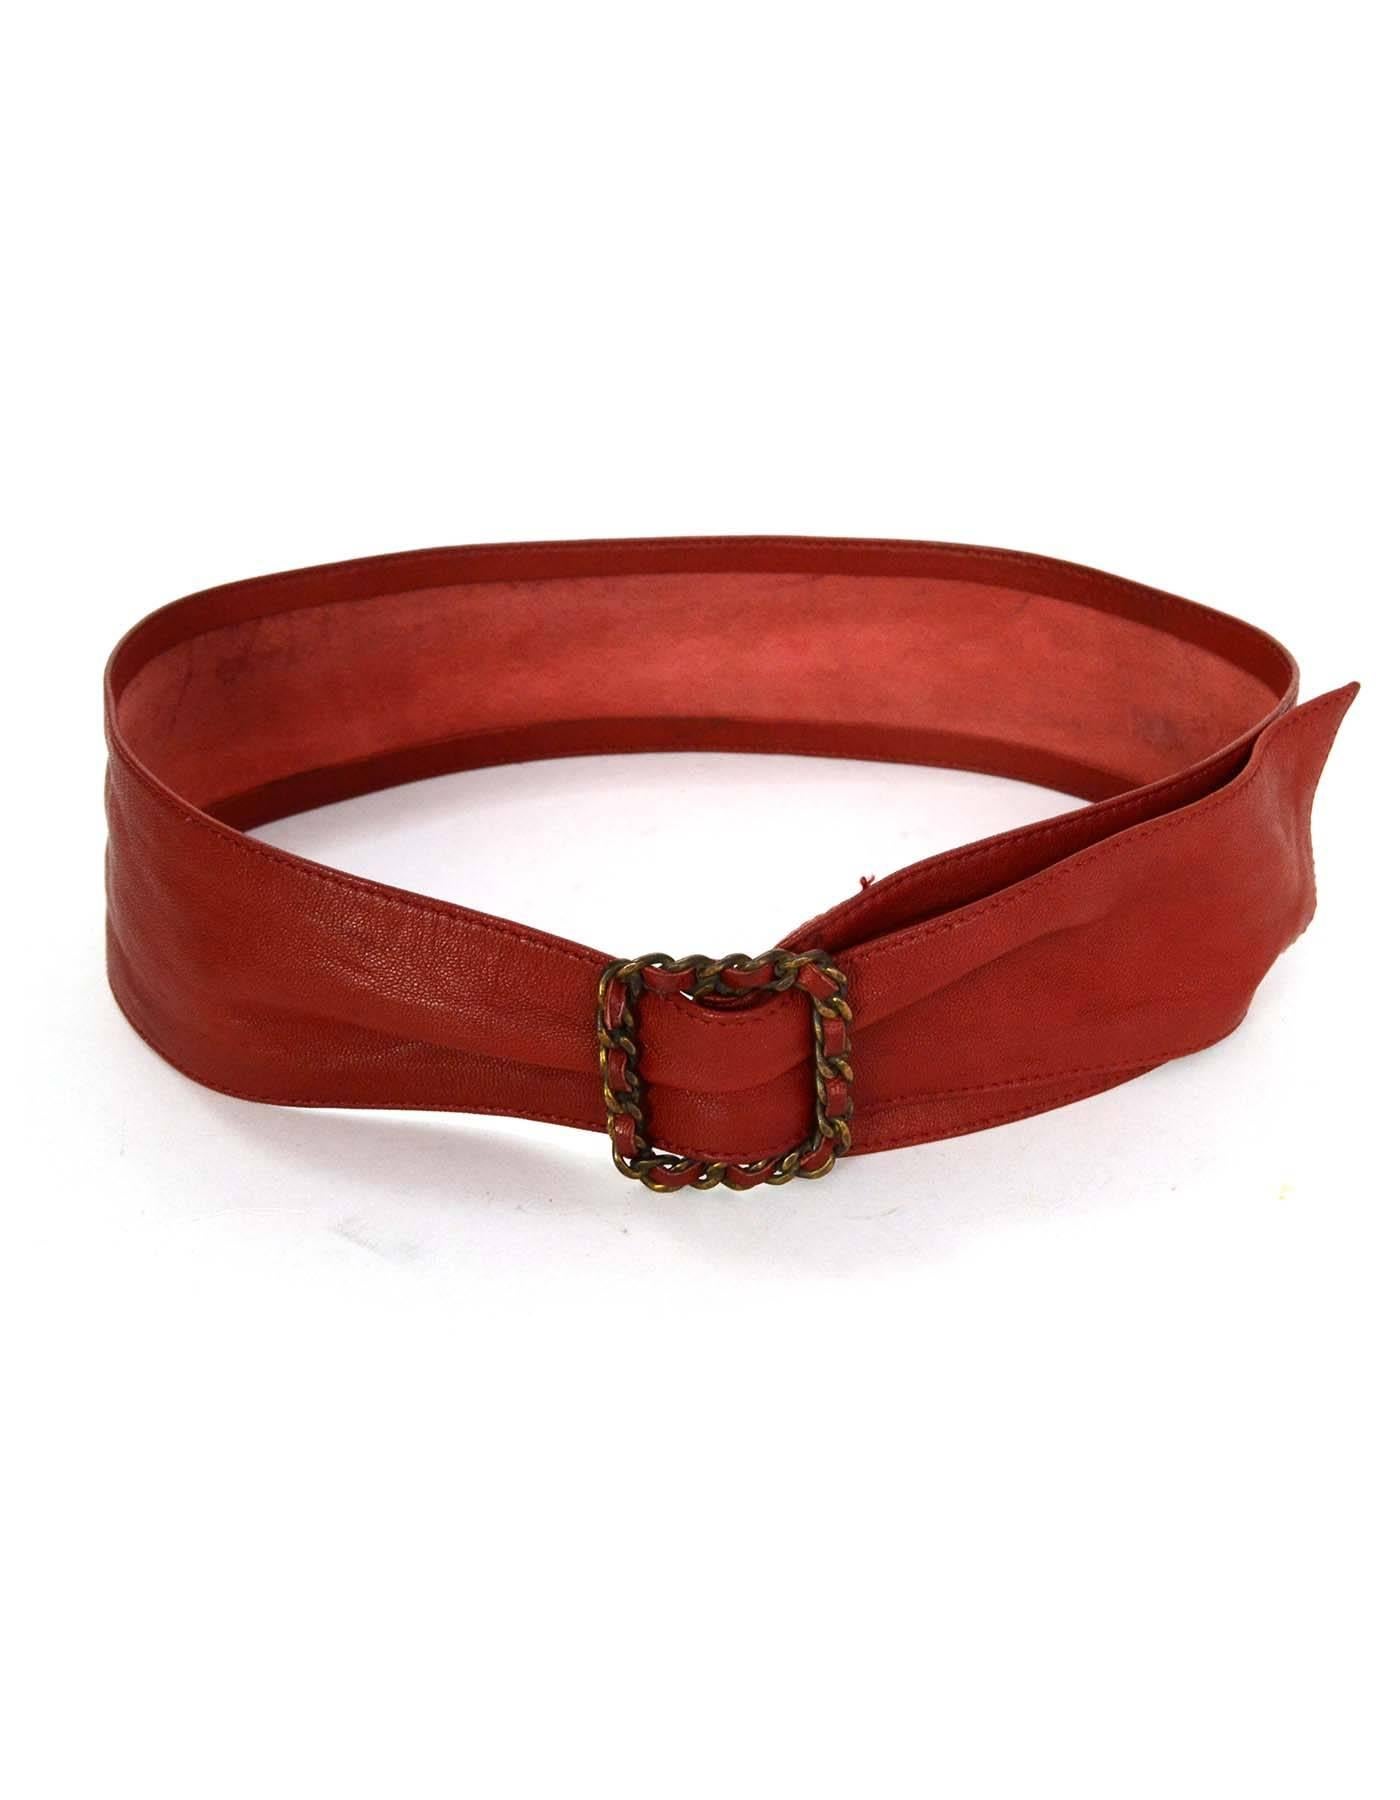 Chanel Red Leather Sash Belt 
Features red leather woven brass chain link belt buckle
Color: Red
Hardware: Brass
Materials: Leather and metal
Closure/Opening: Adjustable belt buckle
Stamp: Chanel
Overall Condition: Very good vintage,